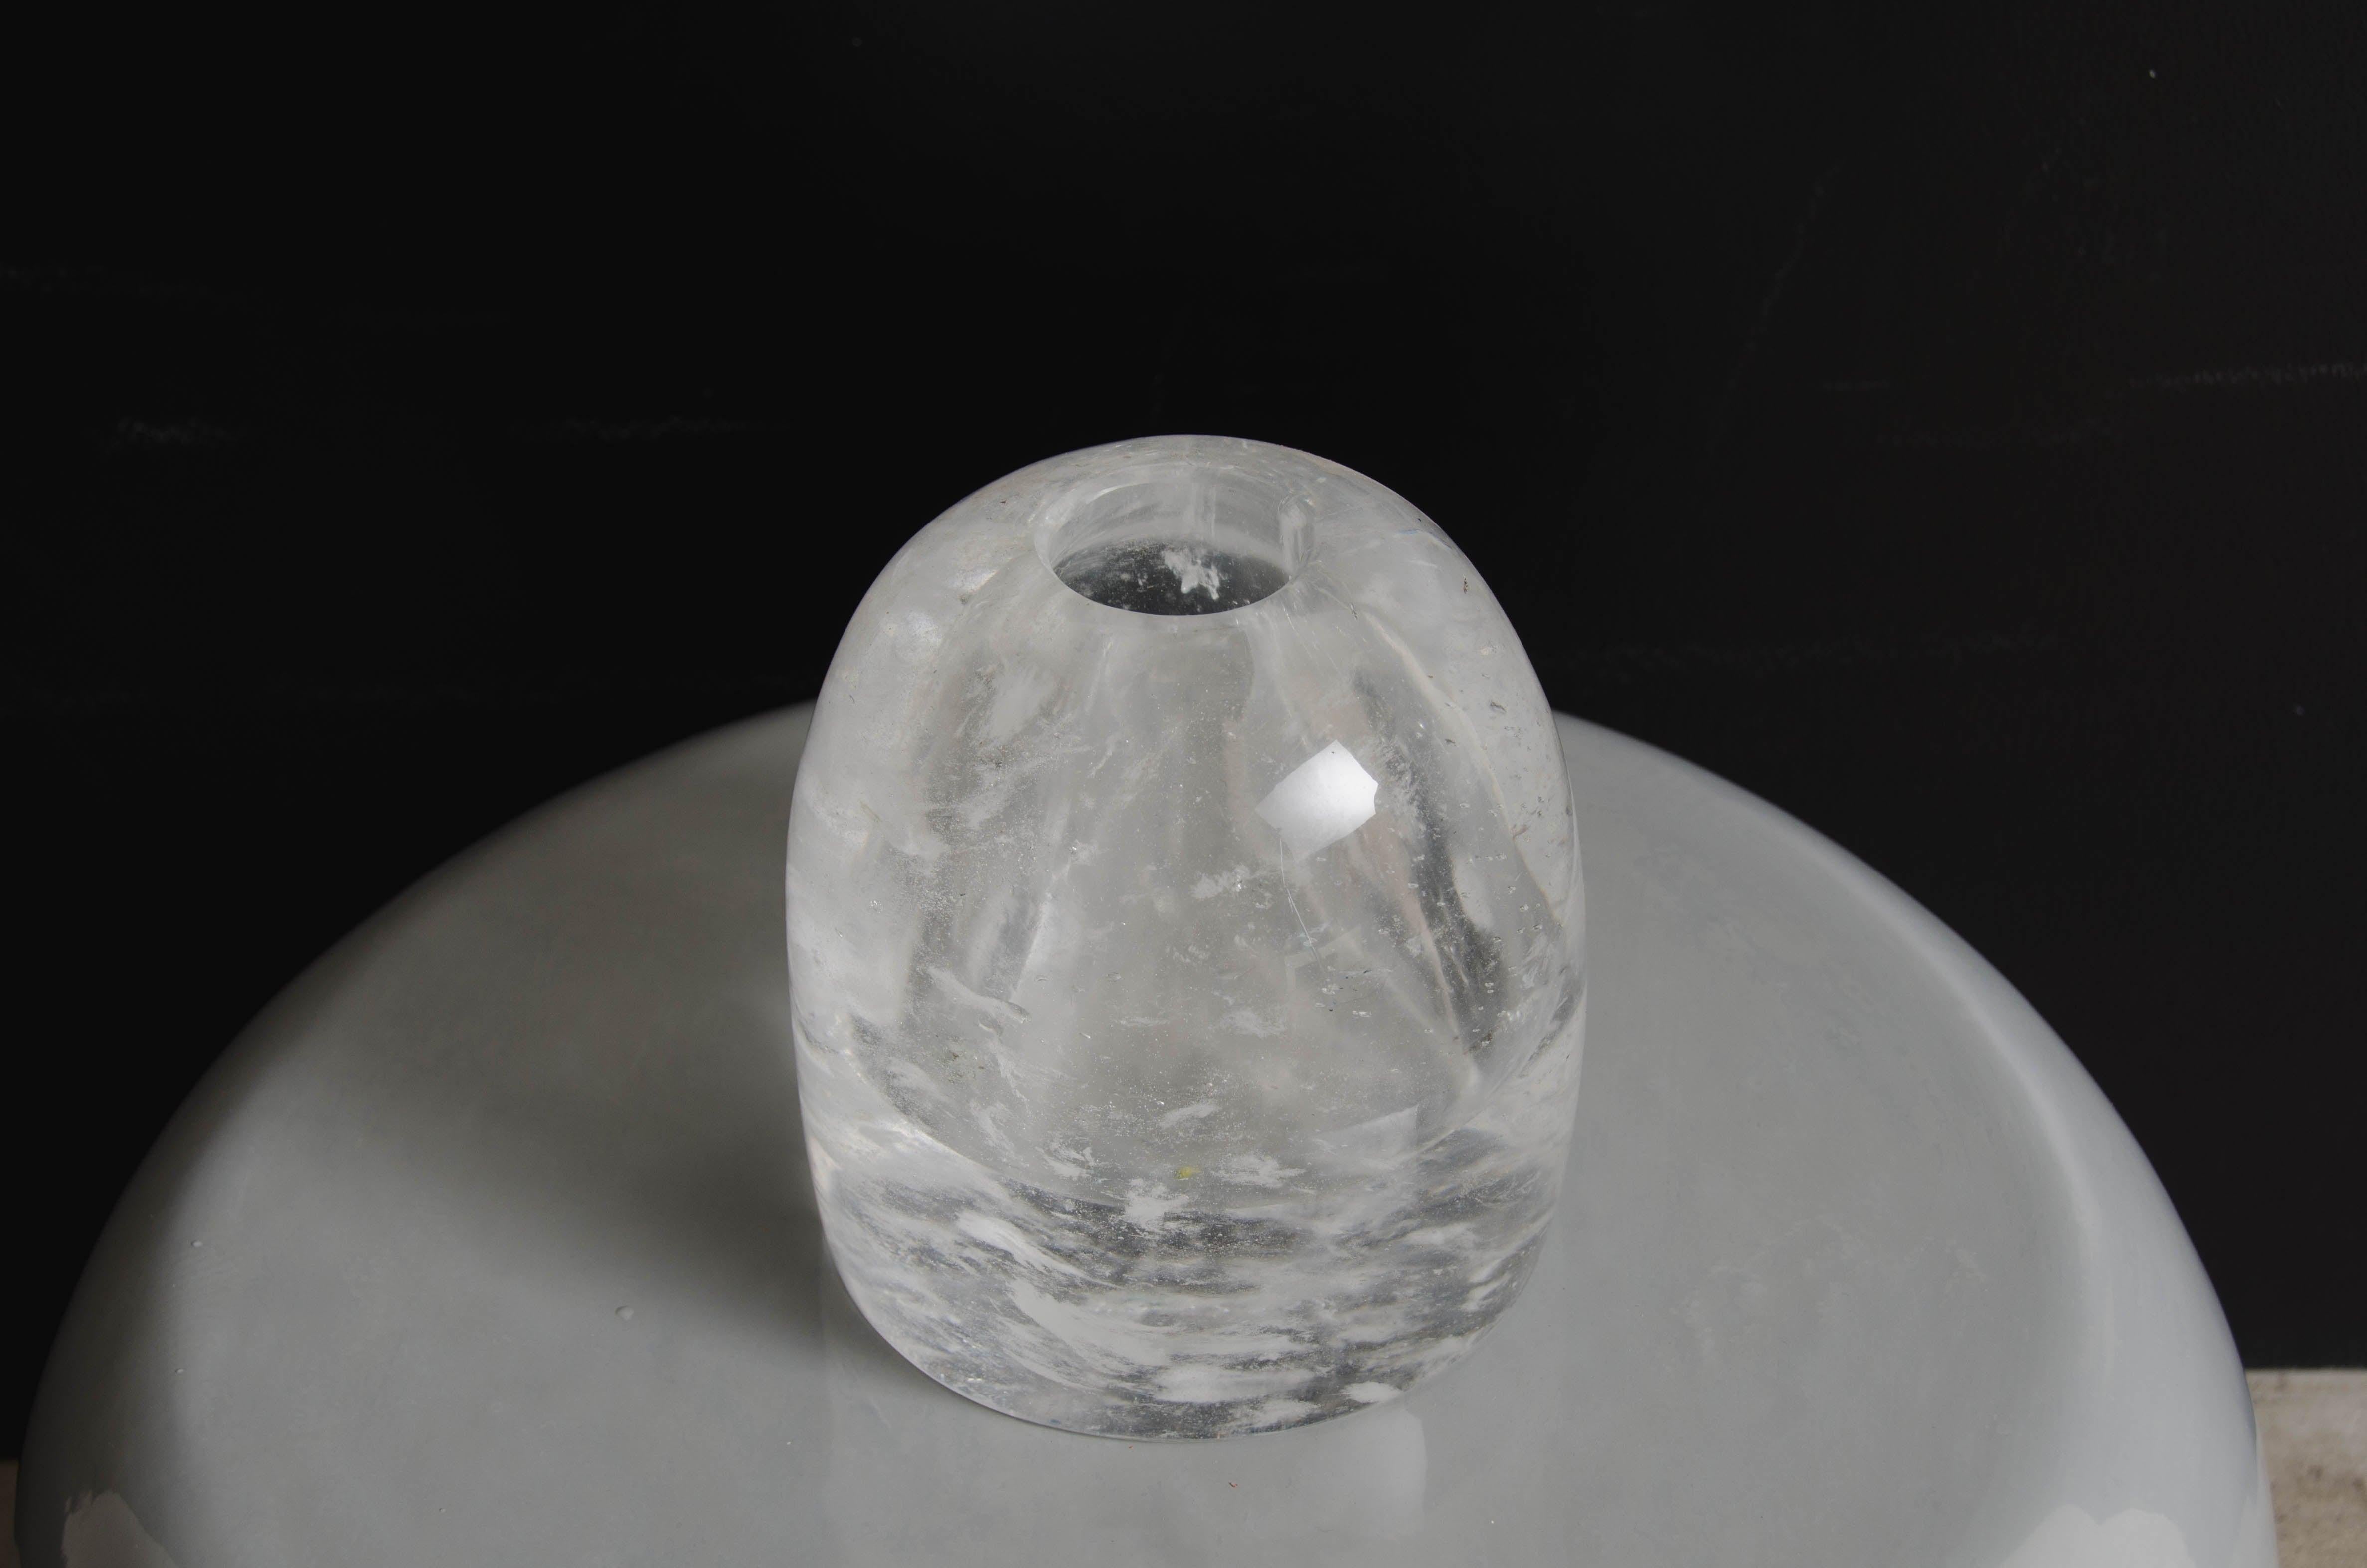 Crystal vase
Crystal
Hand carved
Limited edition
Inclusions and varies.